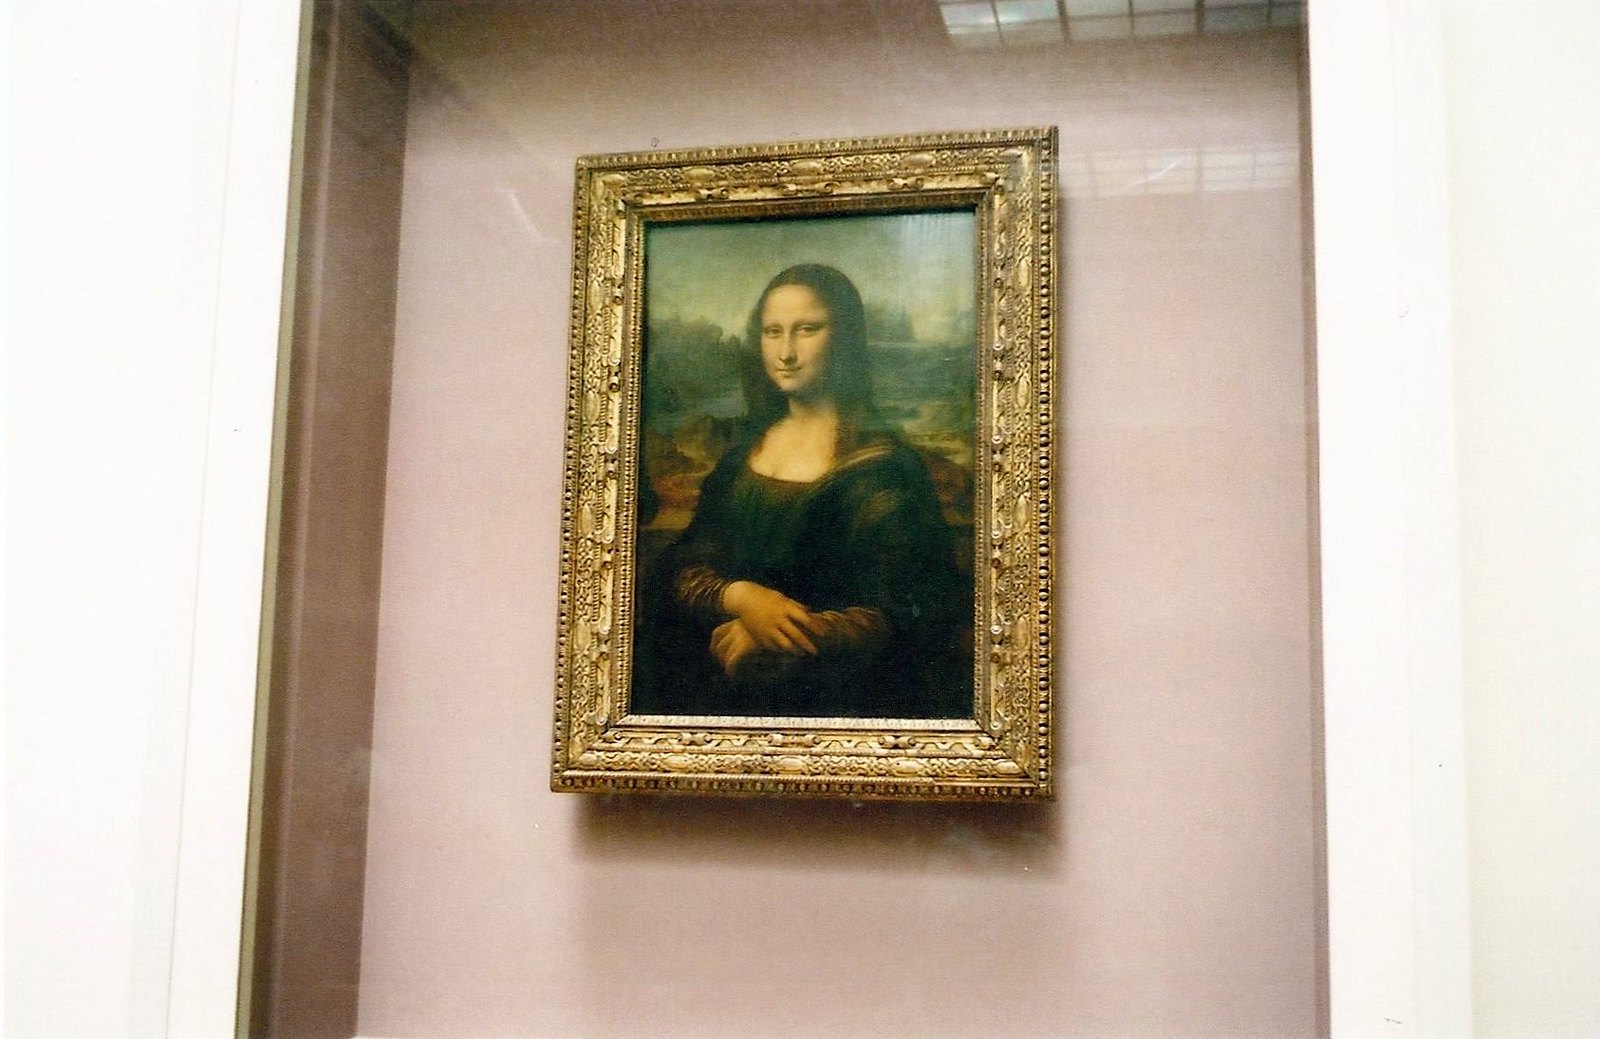 <p>The mania surrounding the <em>Mona Lisa</em> has diminished many visitor experiences of The Louvre as a whole. The <strong>crowds are so thick and the gallery so congested</strong> that some are now urging tourists to skip the experience altogether.</p>